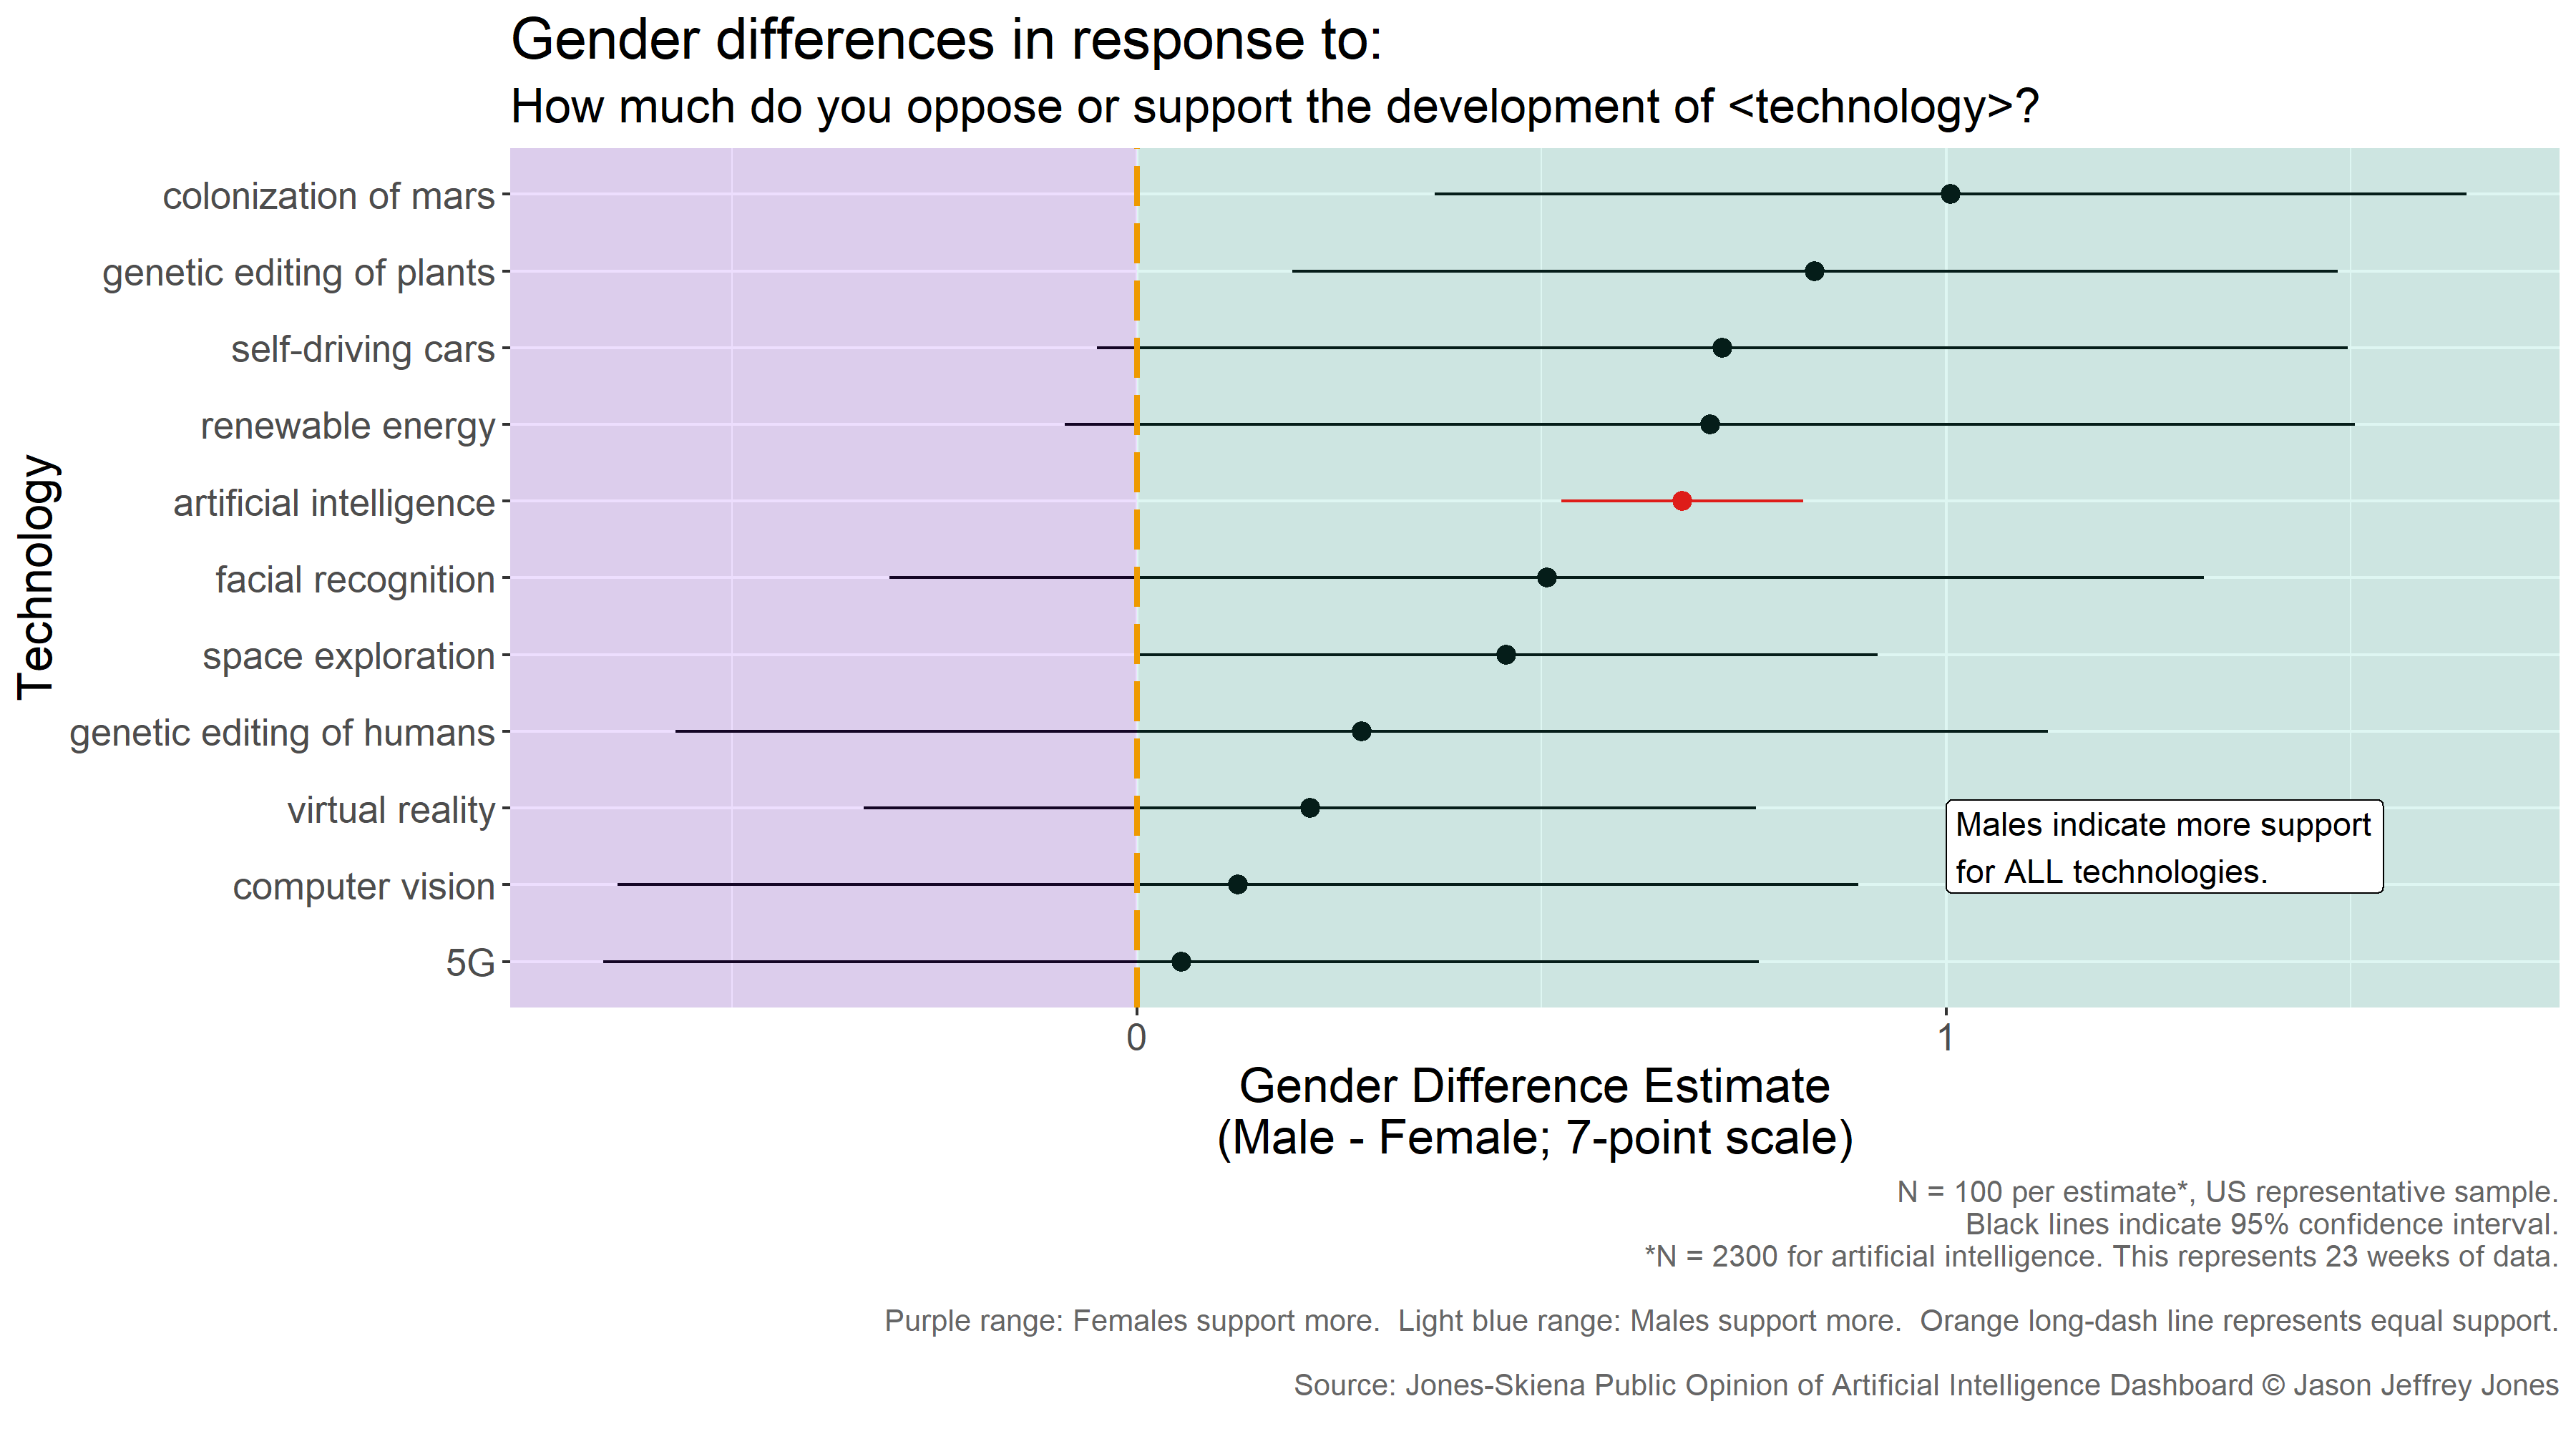 Figure for Gender Differences in How much do you oppose or support the development of technology?